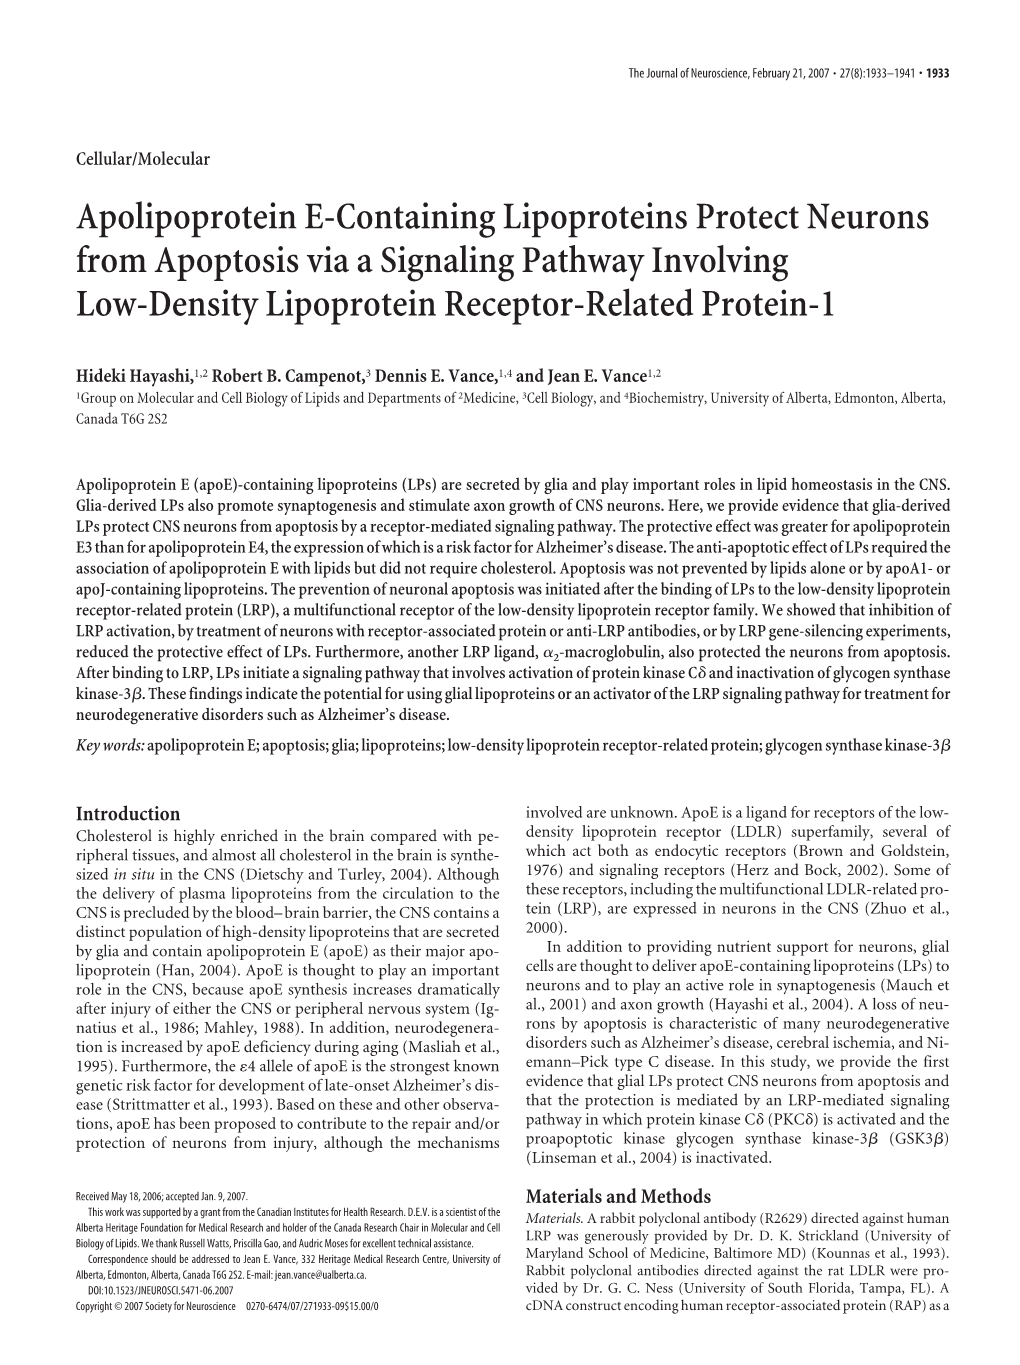 Apolipoprotein E-Containing Lipoproteins Protect Neurons from Apoptosis Via a Signaling Pathway Involving Low-Density Lipoprotein Receptor-Related Protein-1